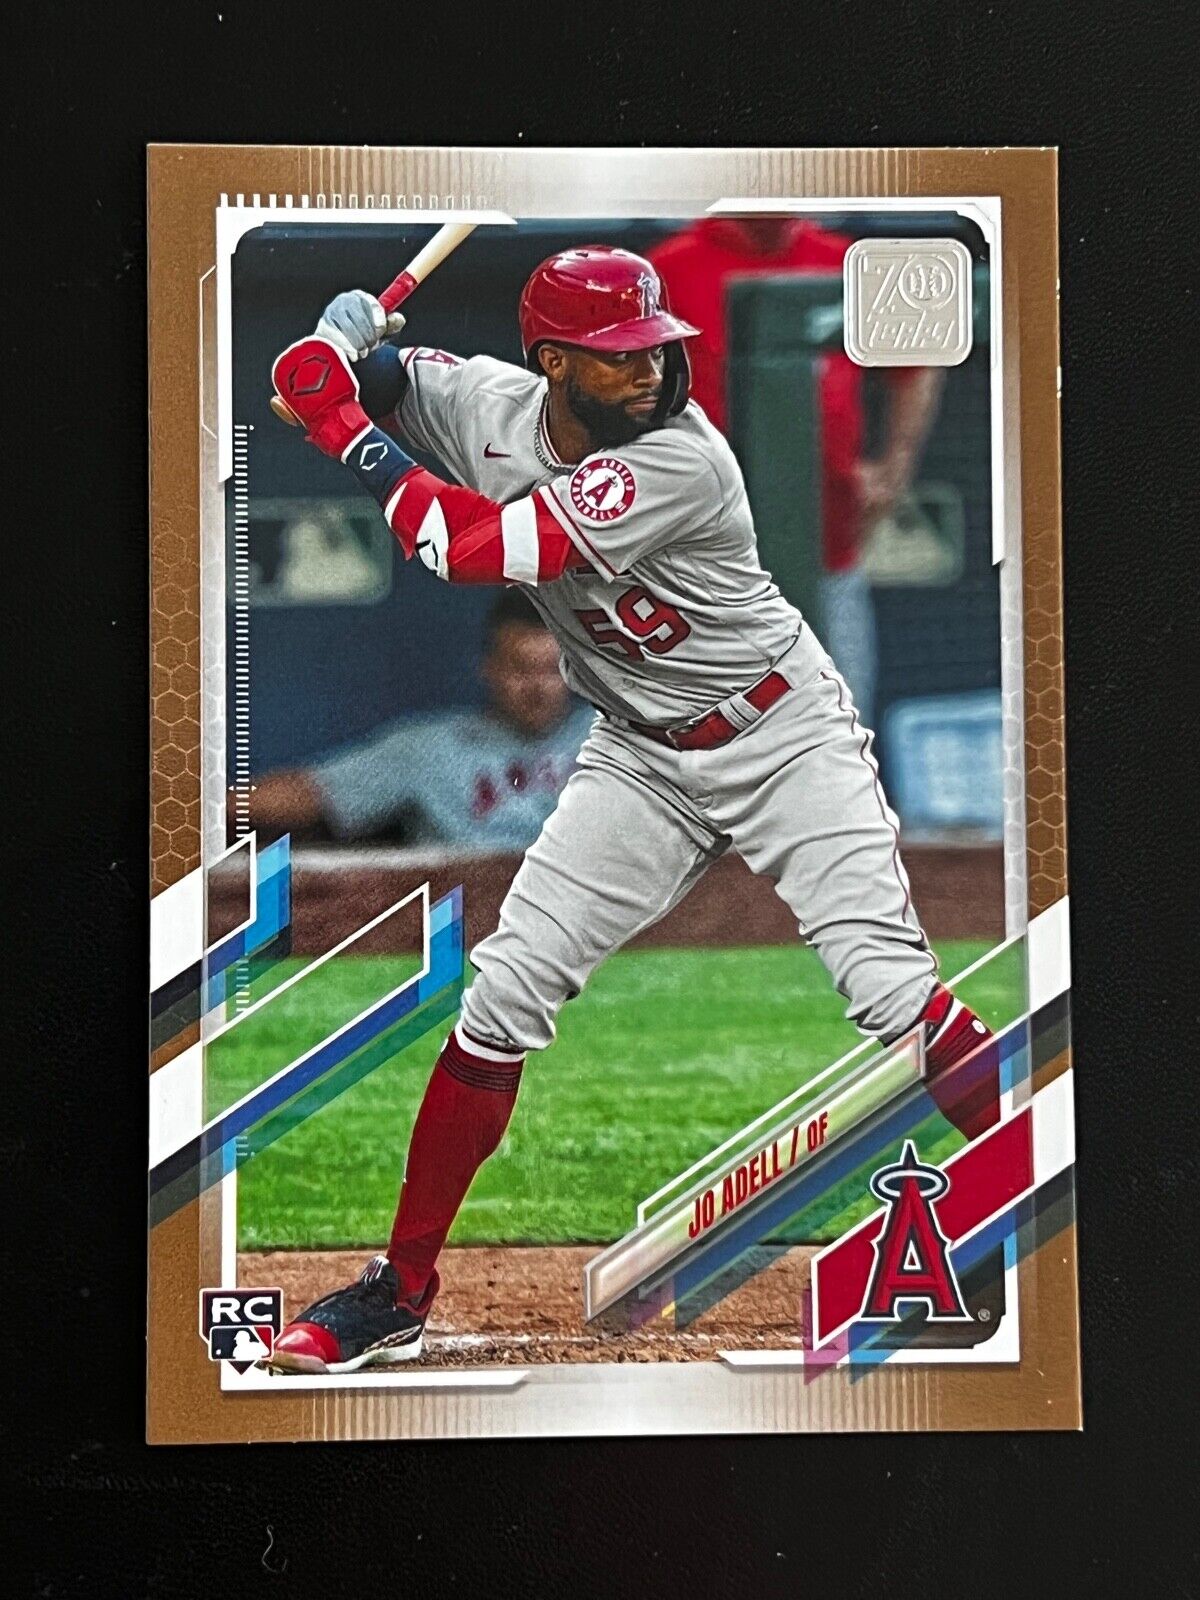 2021 Topps Series 1 JO ADELL RC Gold Foil Parallel 1439/2021 Angels